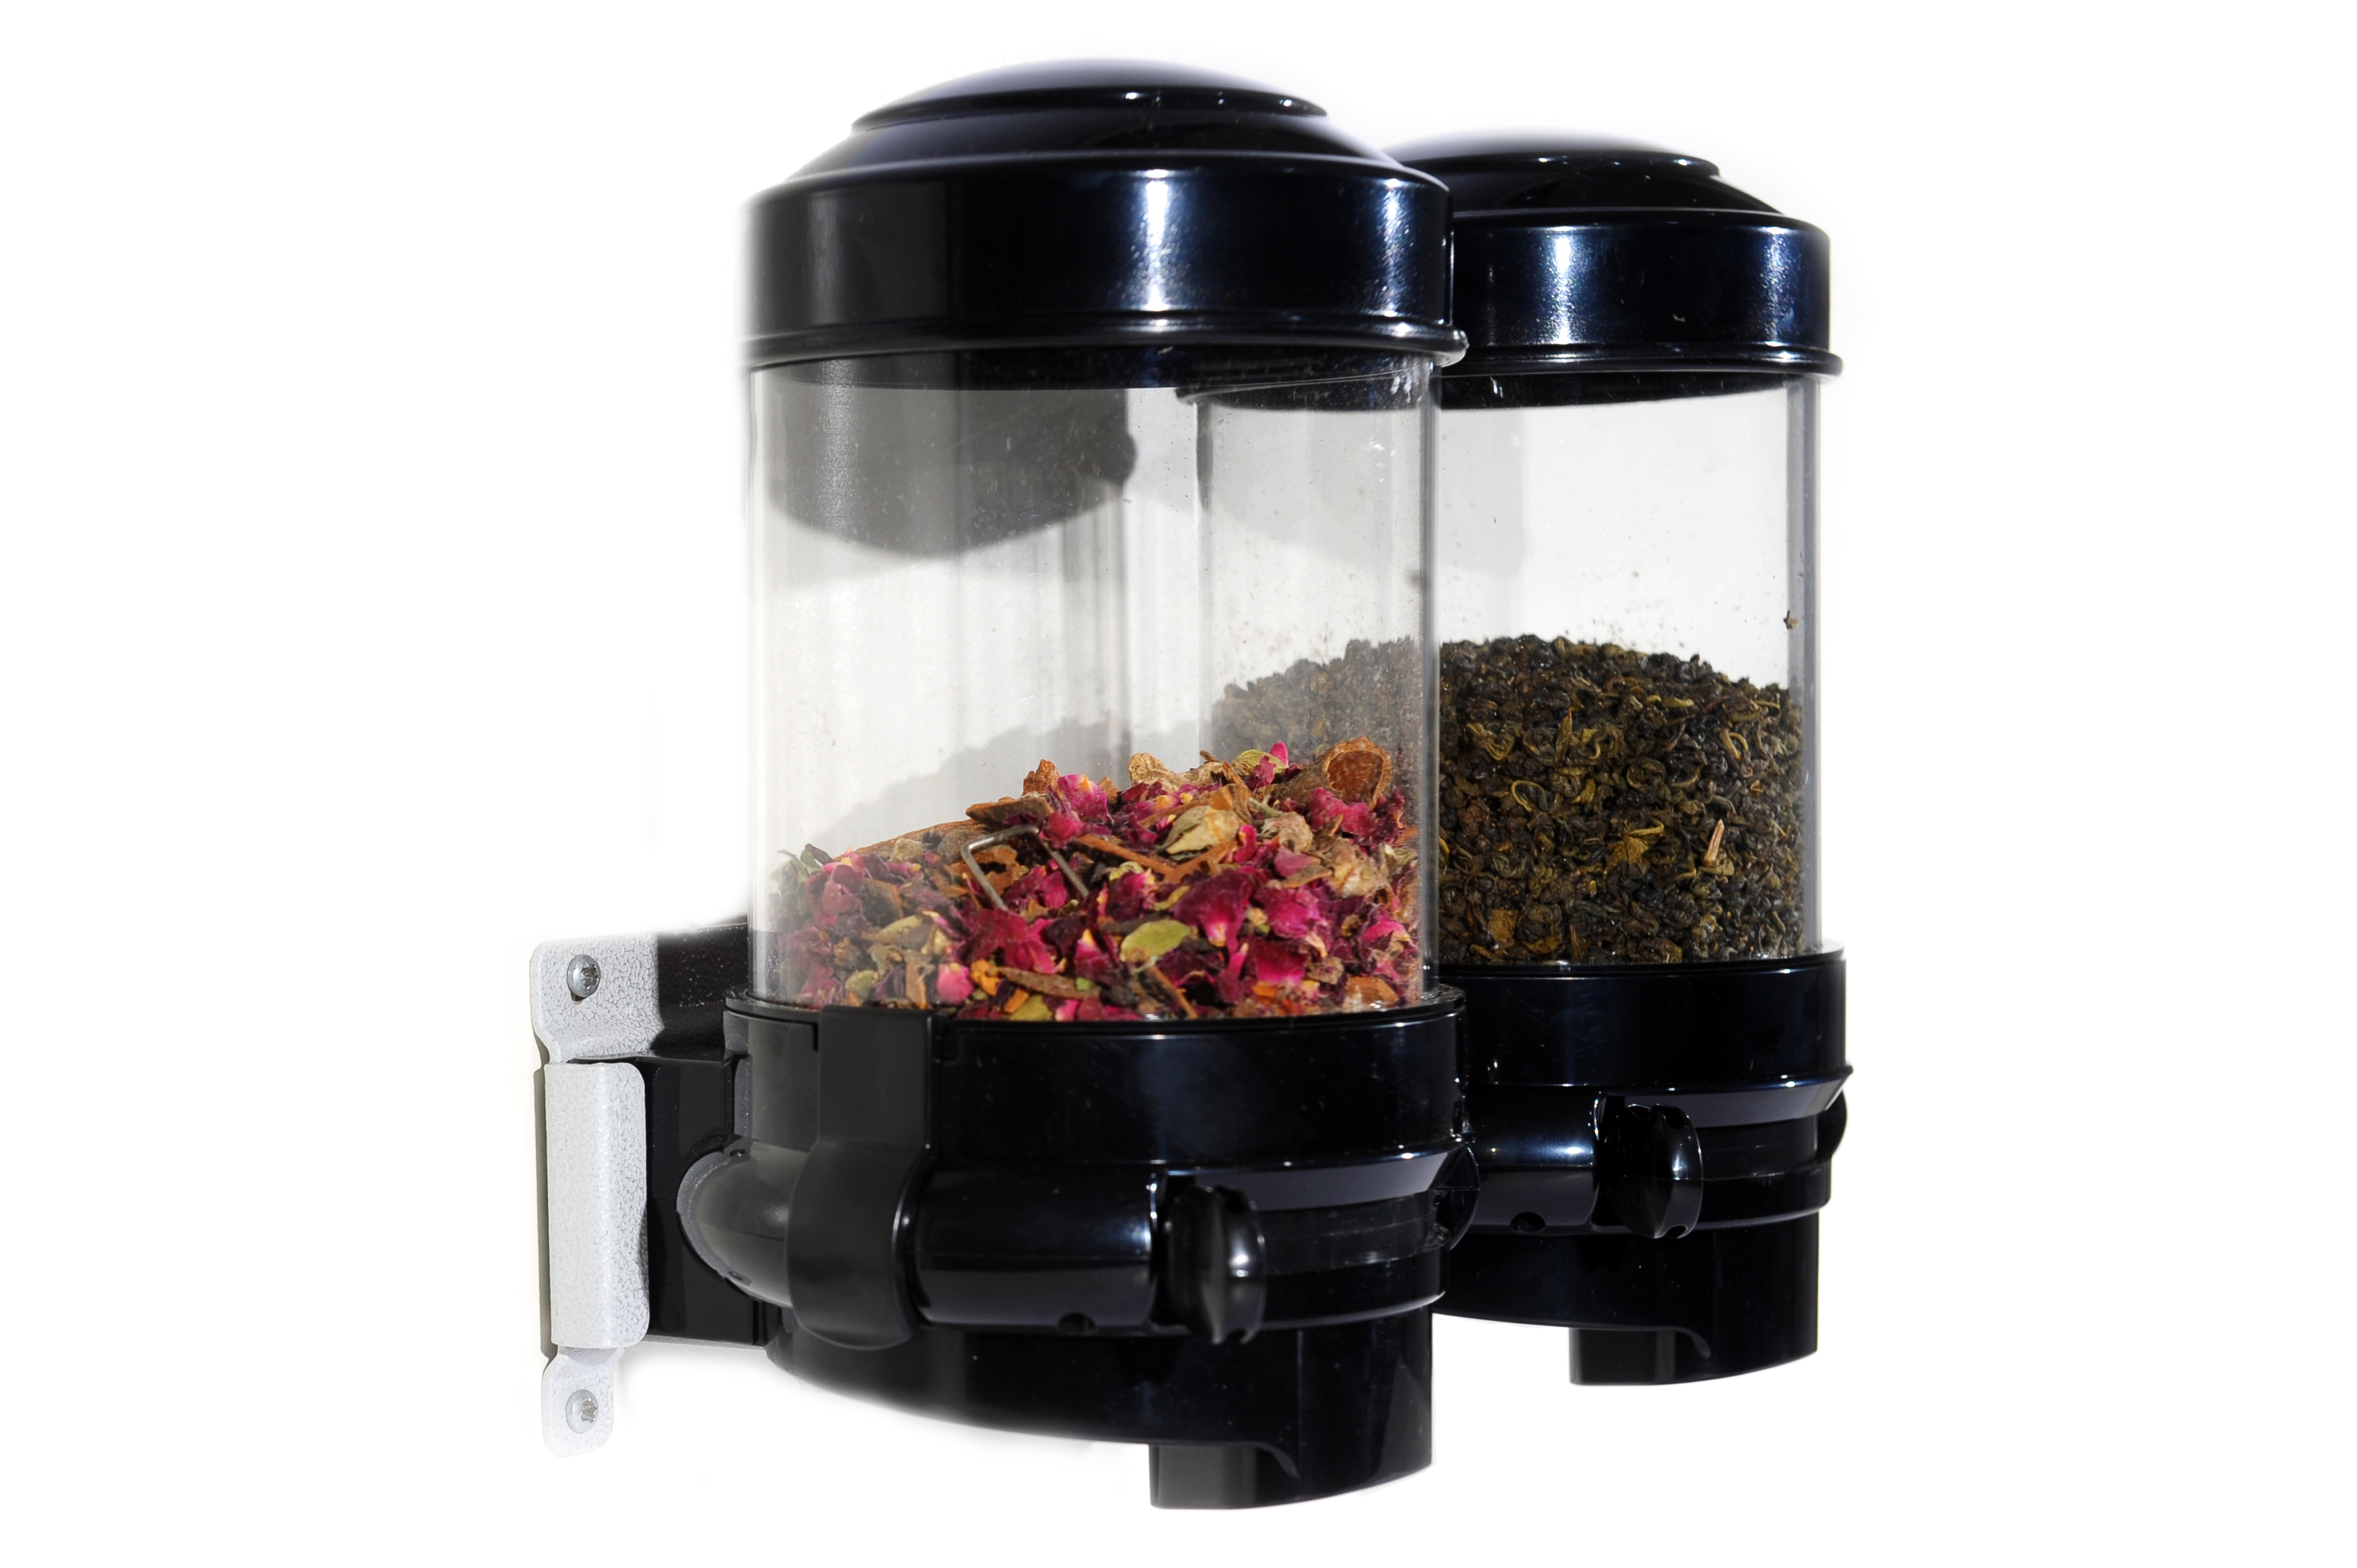 Multi X | Tea Leaf..<p><strong>Price: $444.45</strong> </p>]]></description>
			<content:encoded><![CDATA[<div style='float: right; padding: 10px;'><a href=